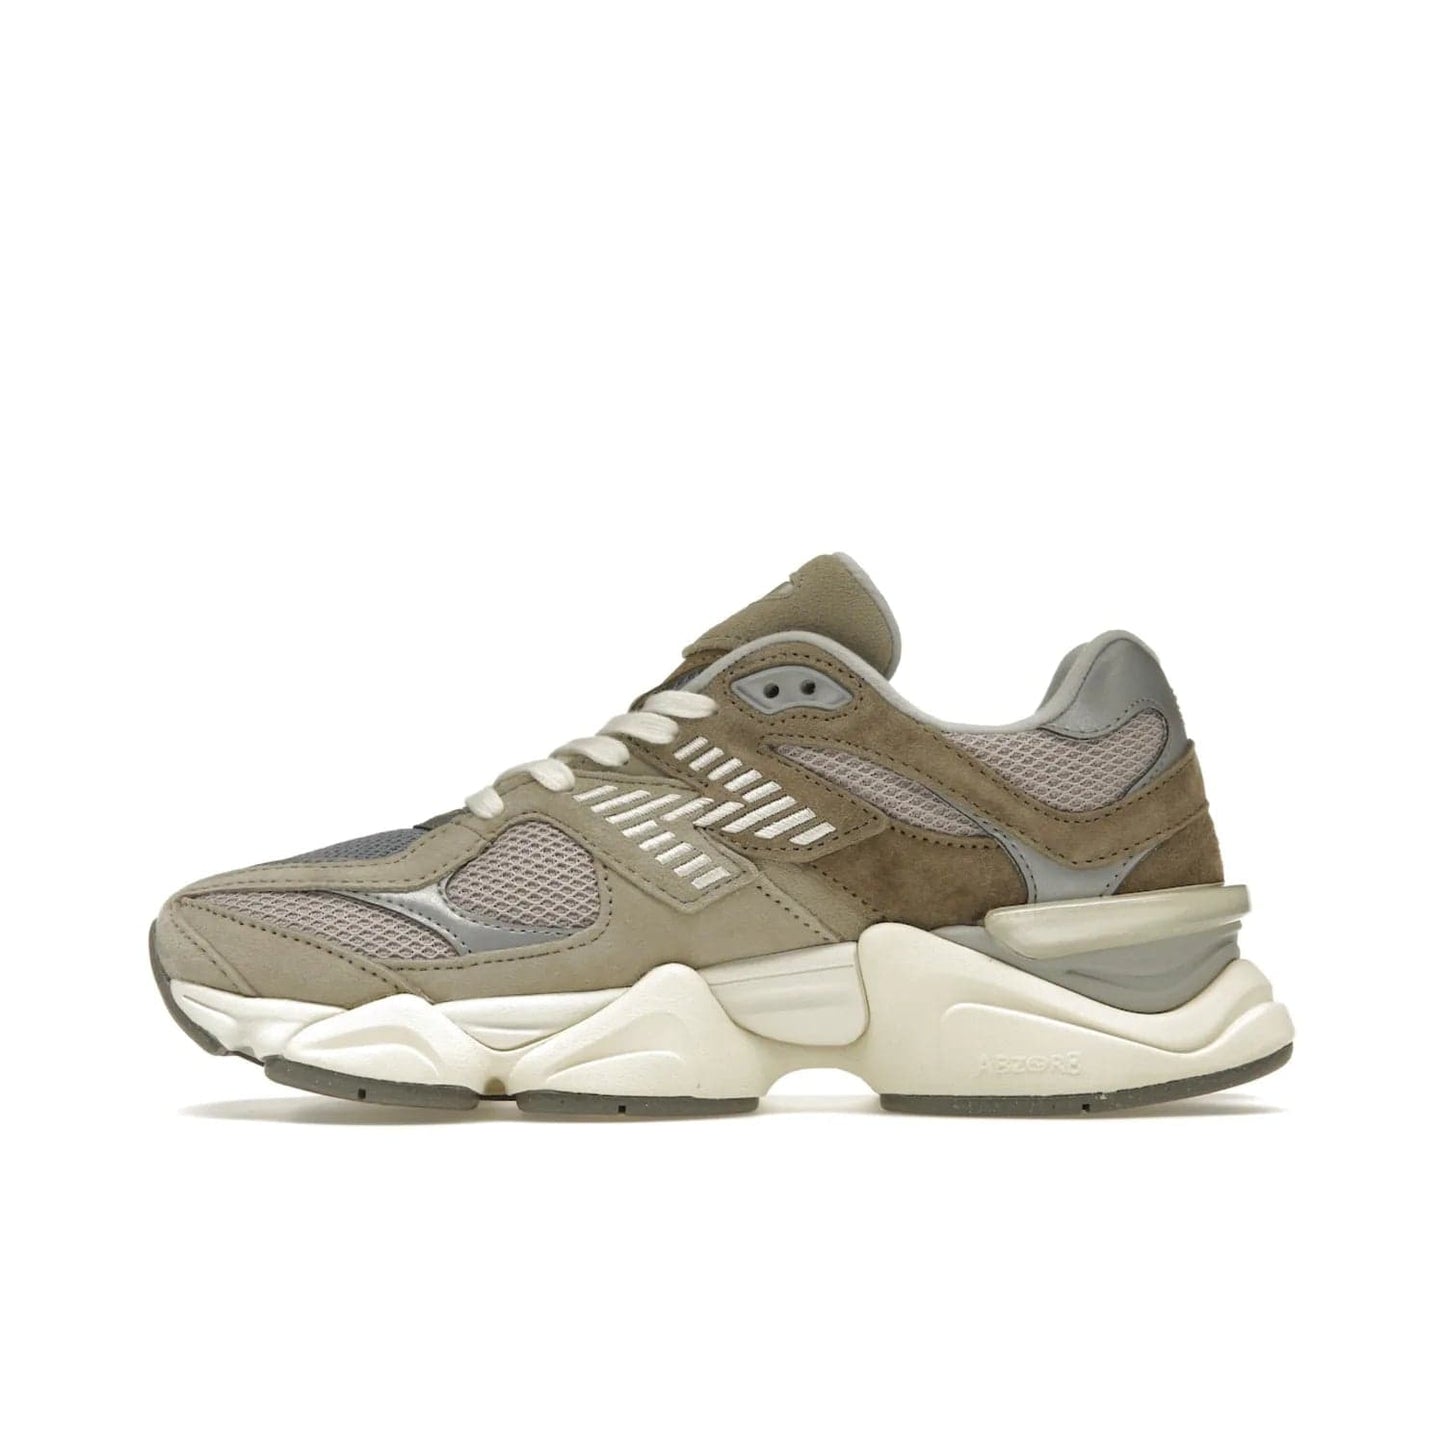 New Balance 9060 Mushroom - Image 19 - Only at www.BallersClubKickz.com - Get the New Balance 9060 Mushroom in stylish aluminum and mushroom tones. Featuring a porous mesh fabric with multiple suede overlays, a grey N symbol and rugged off-white/grey sole. Shop now and make a statement.